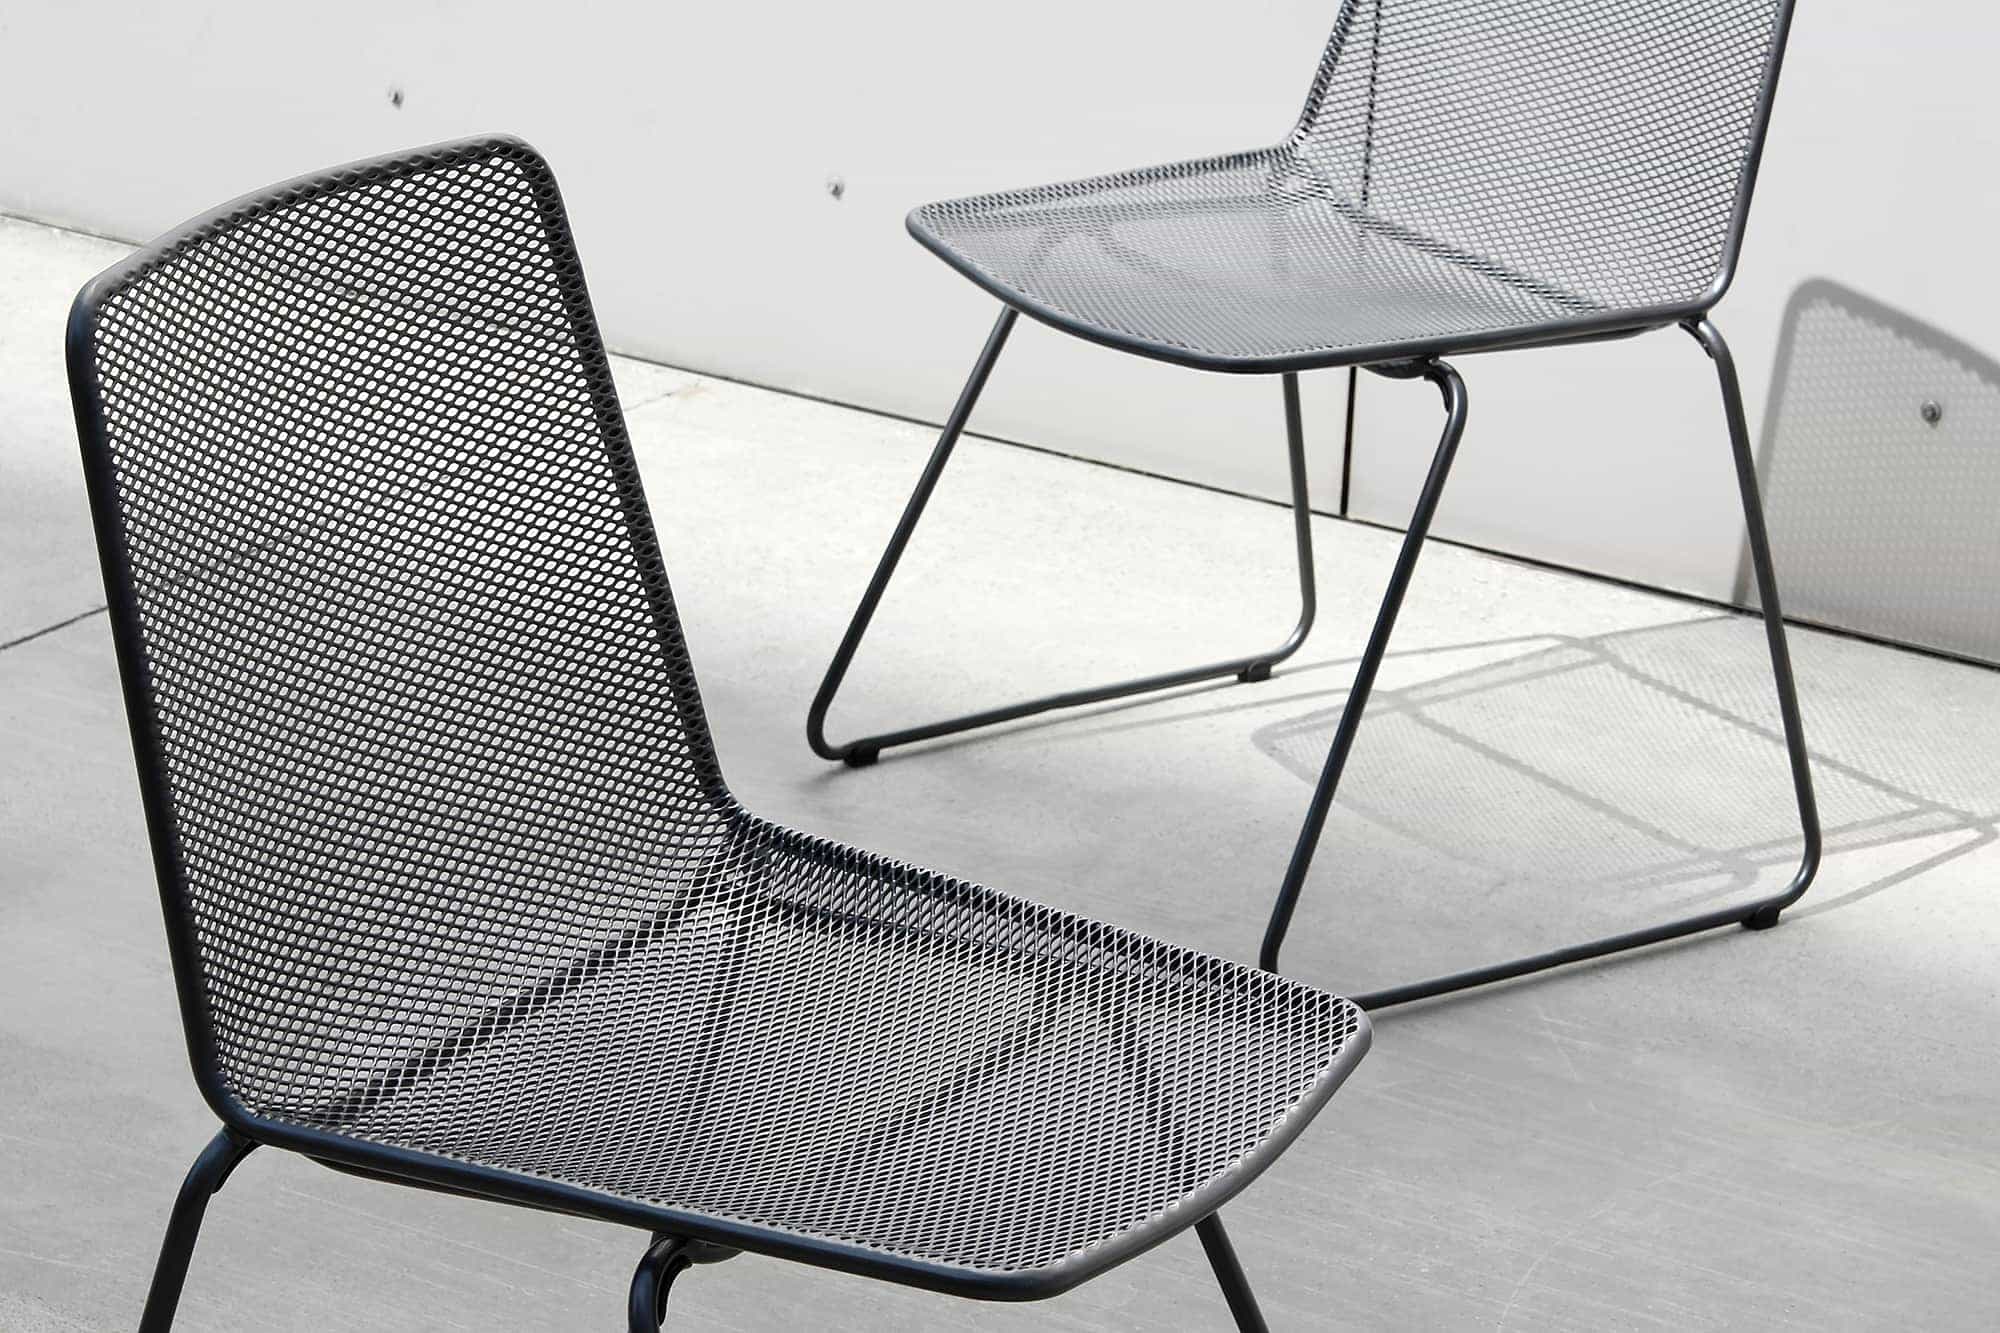 Haley Chairs with base in bent steel tube and seat and backrest in steel mesh in dark colors